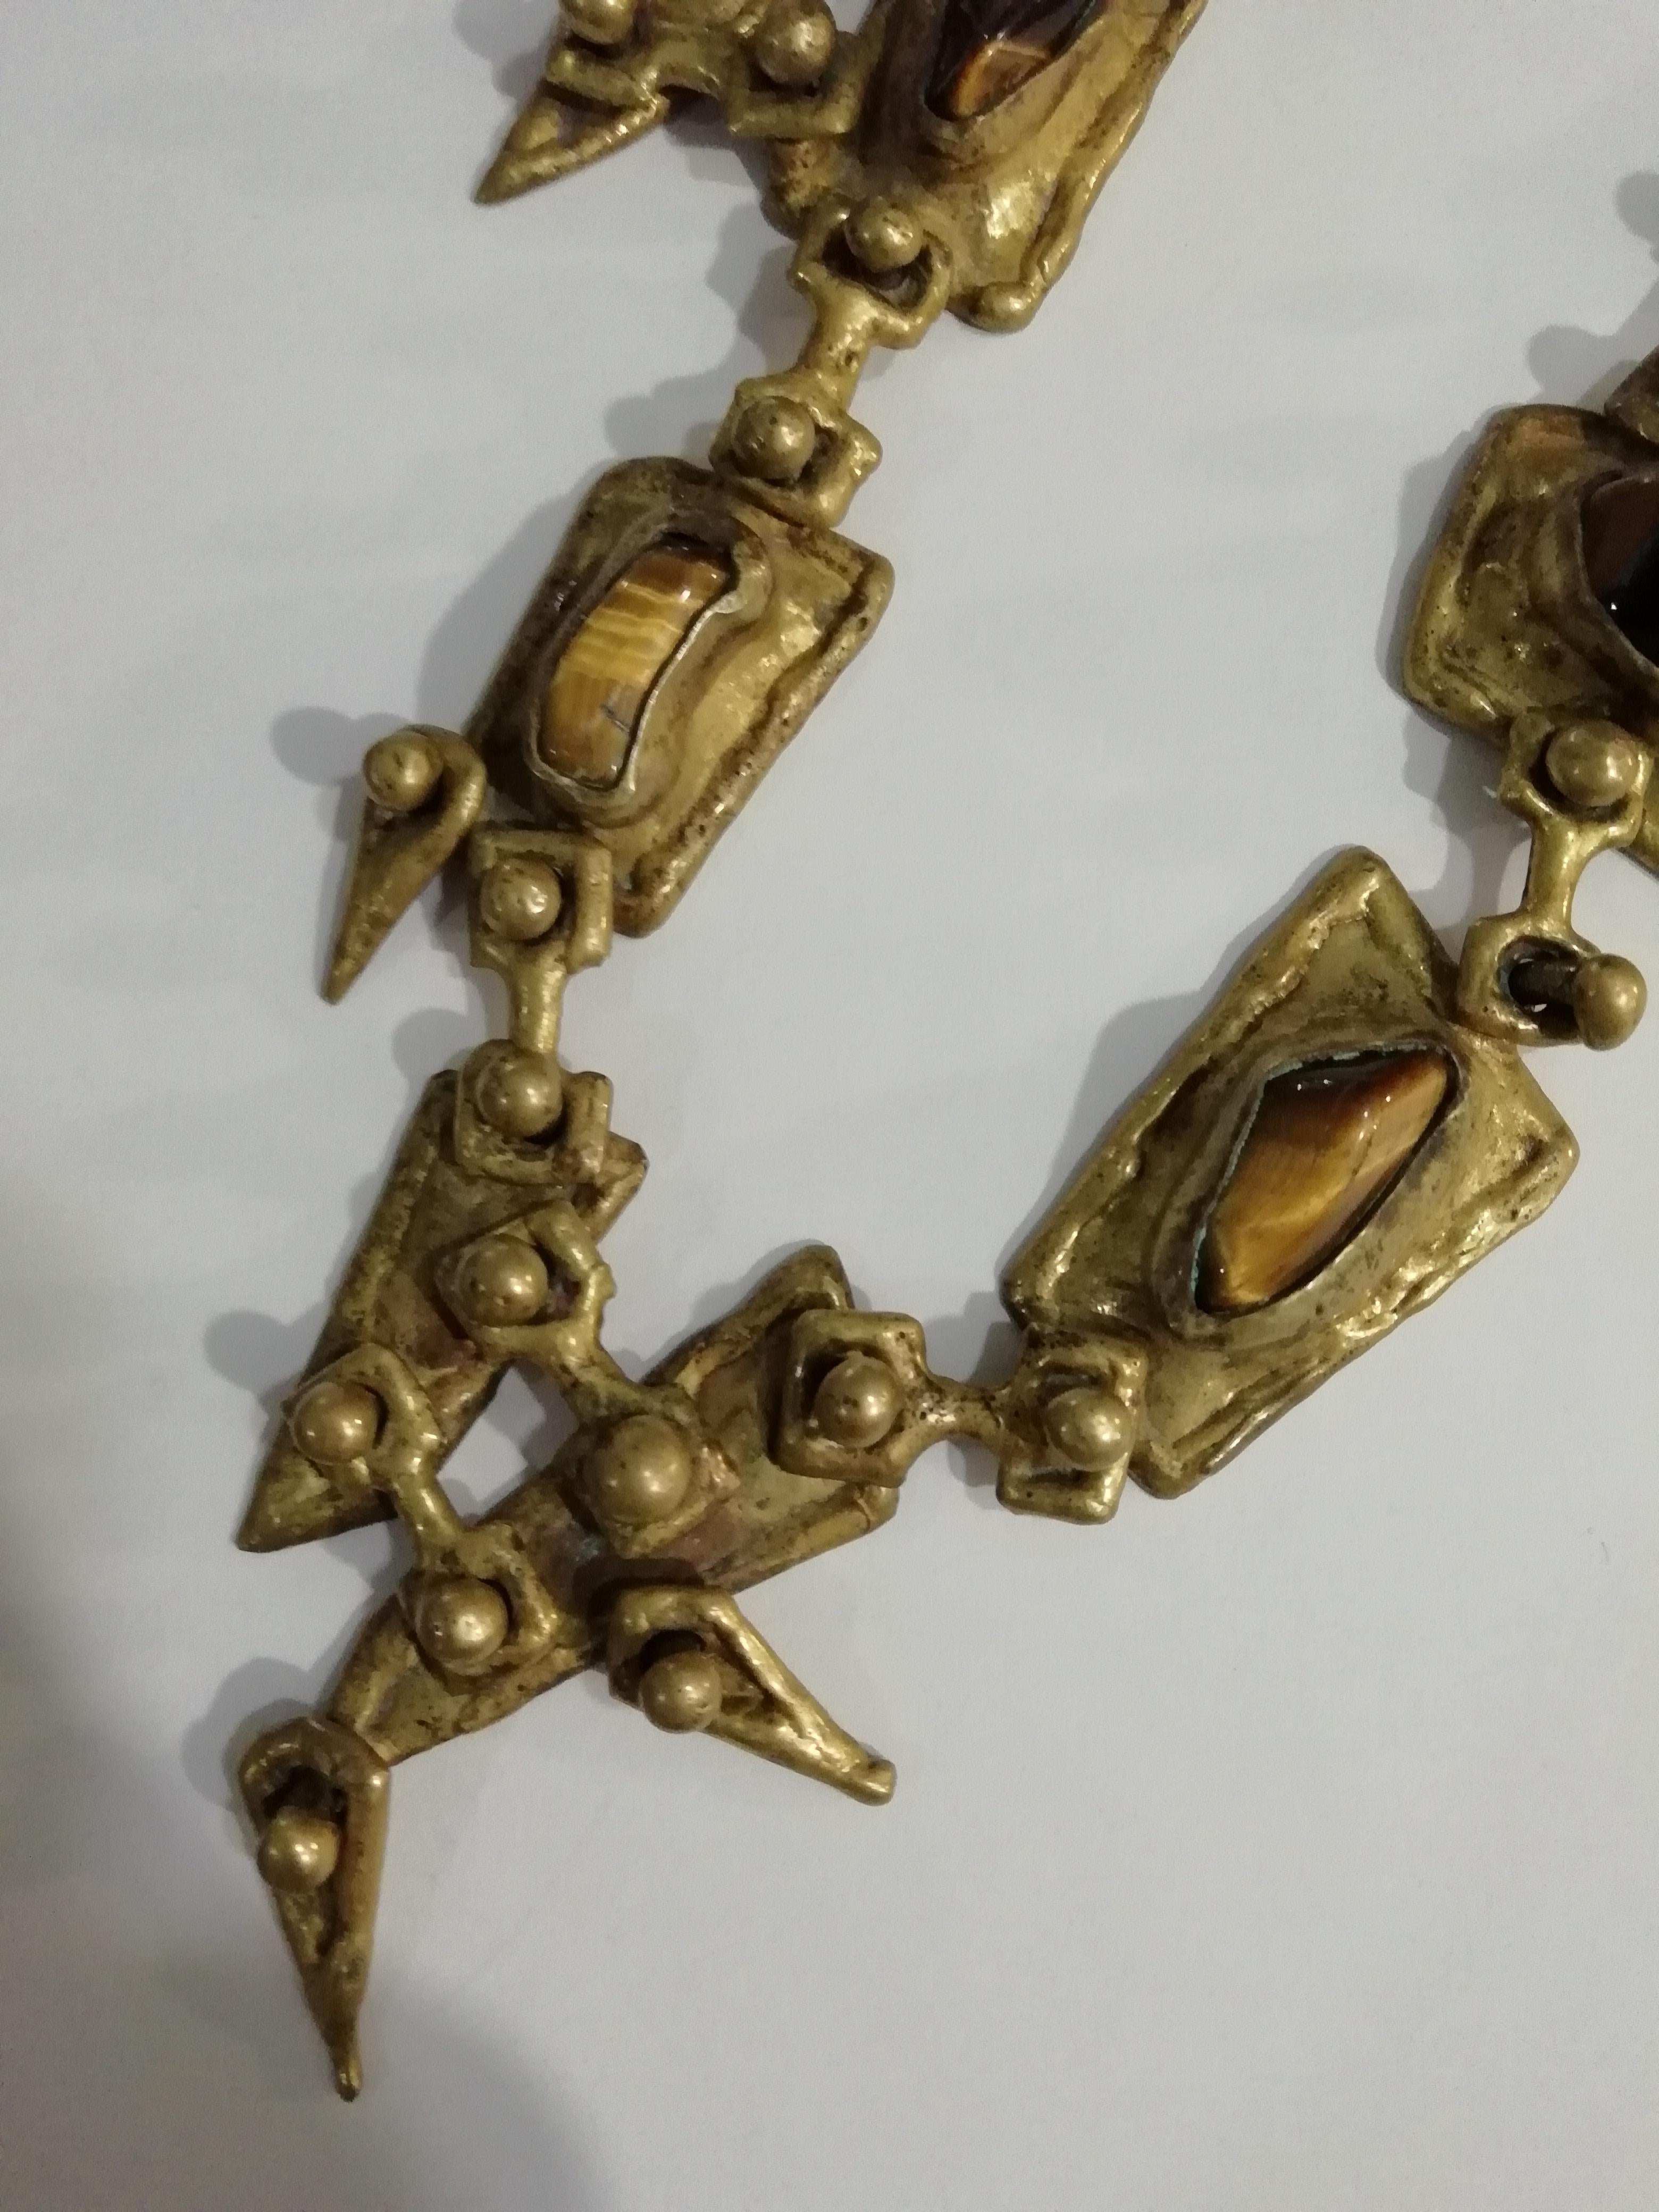 A gorgeous Brutalist style bronze necklace with tiger's eye stones by Pal Kepenyes. The necklace shows 5 irregular tiger's eye stones and geometric design with rounded motifs. Signed on back.

Sculptor from Hungary who was nationalized Mexican, he